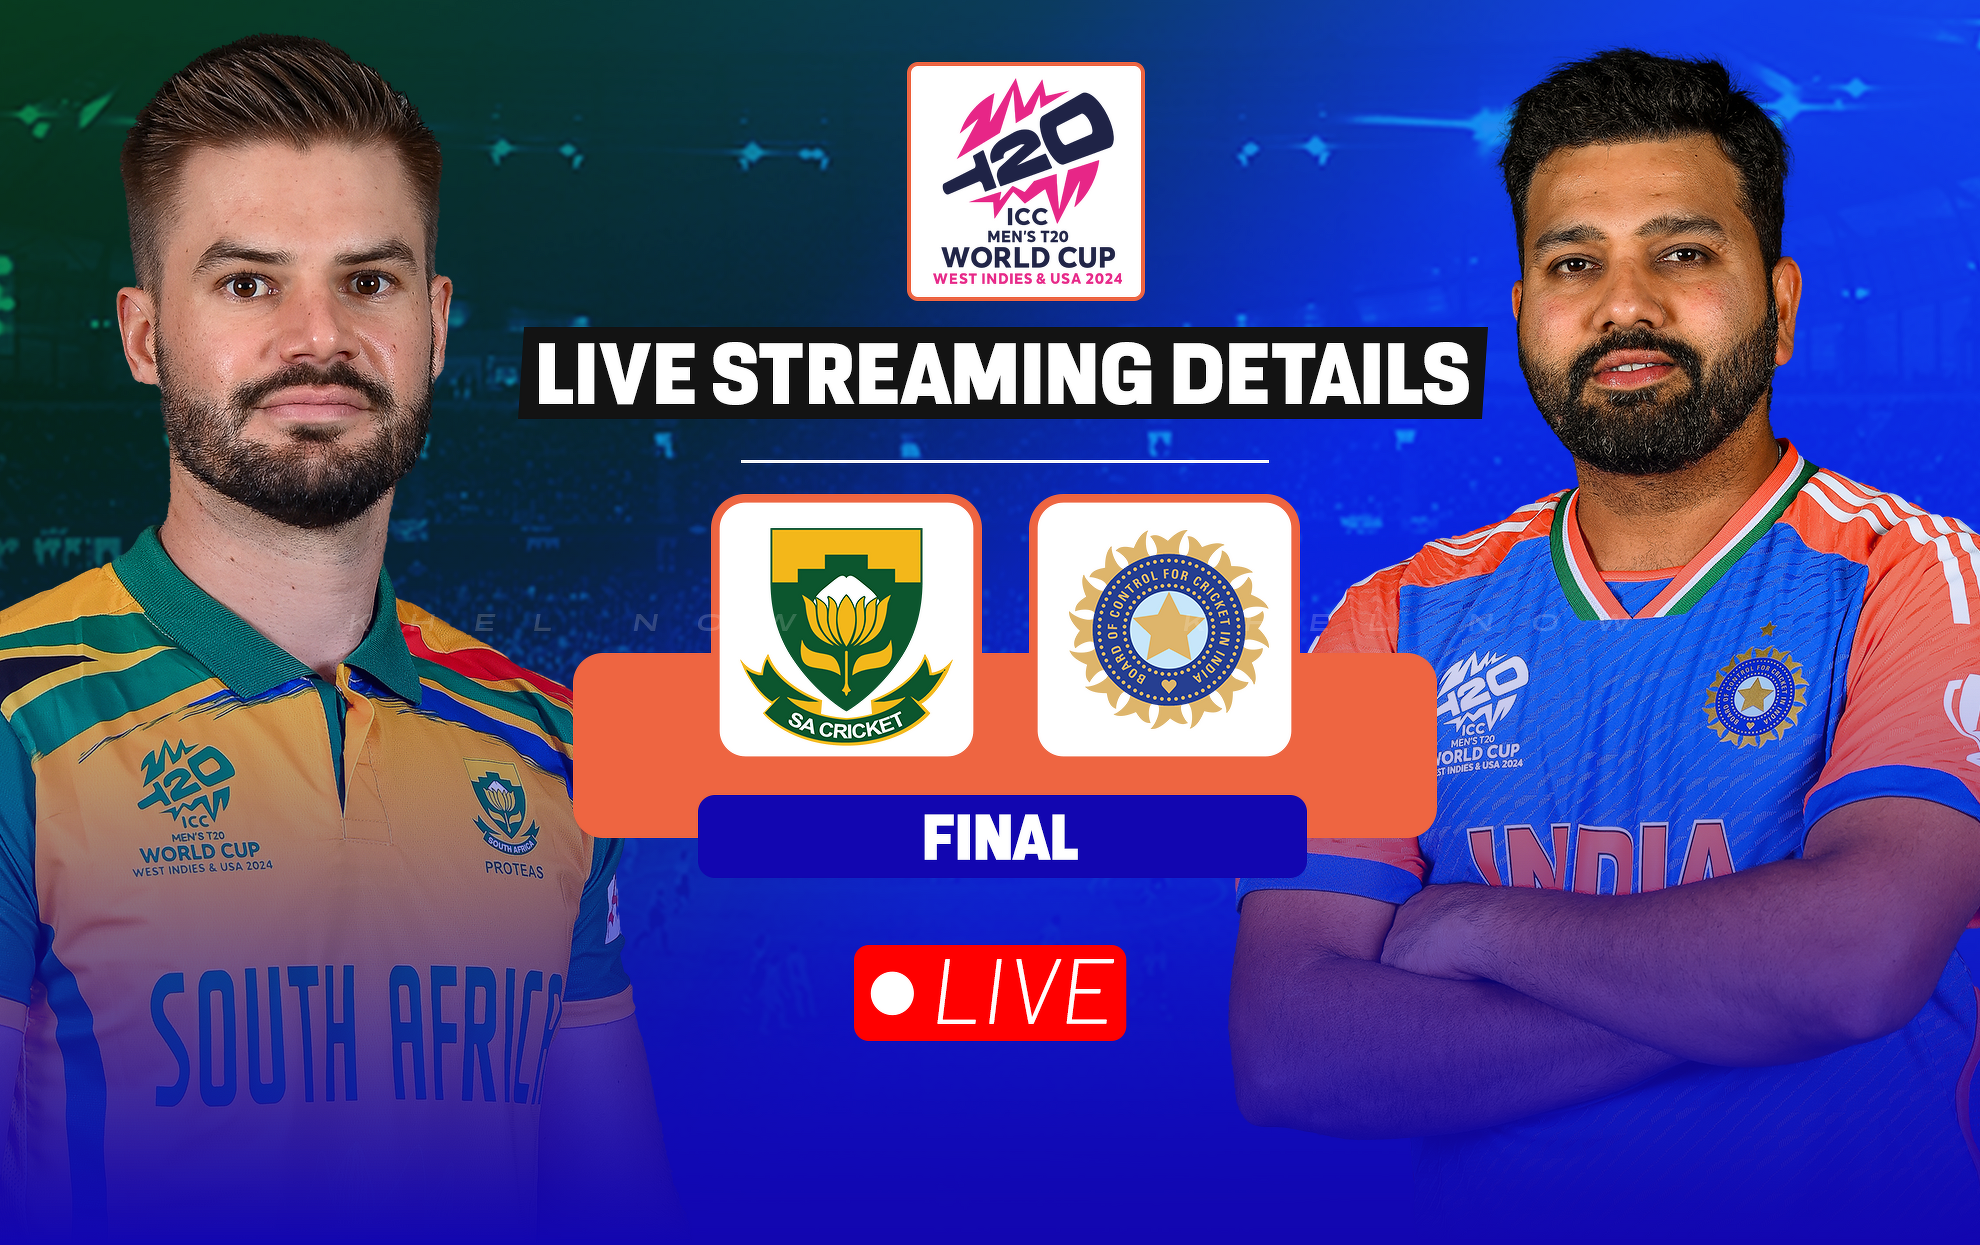 SA vs IND Live streaming details, when and where to watch final of ICC